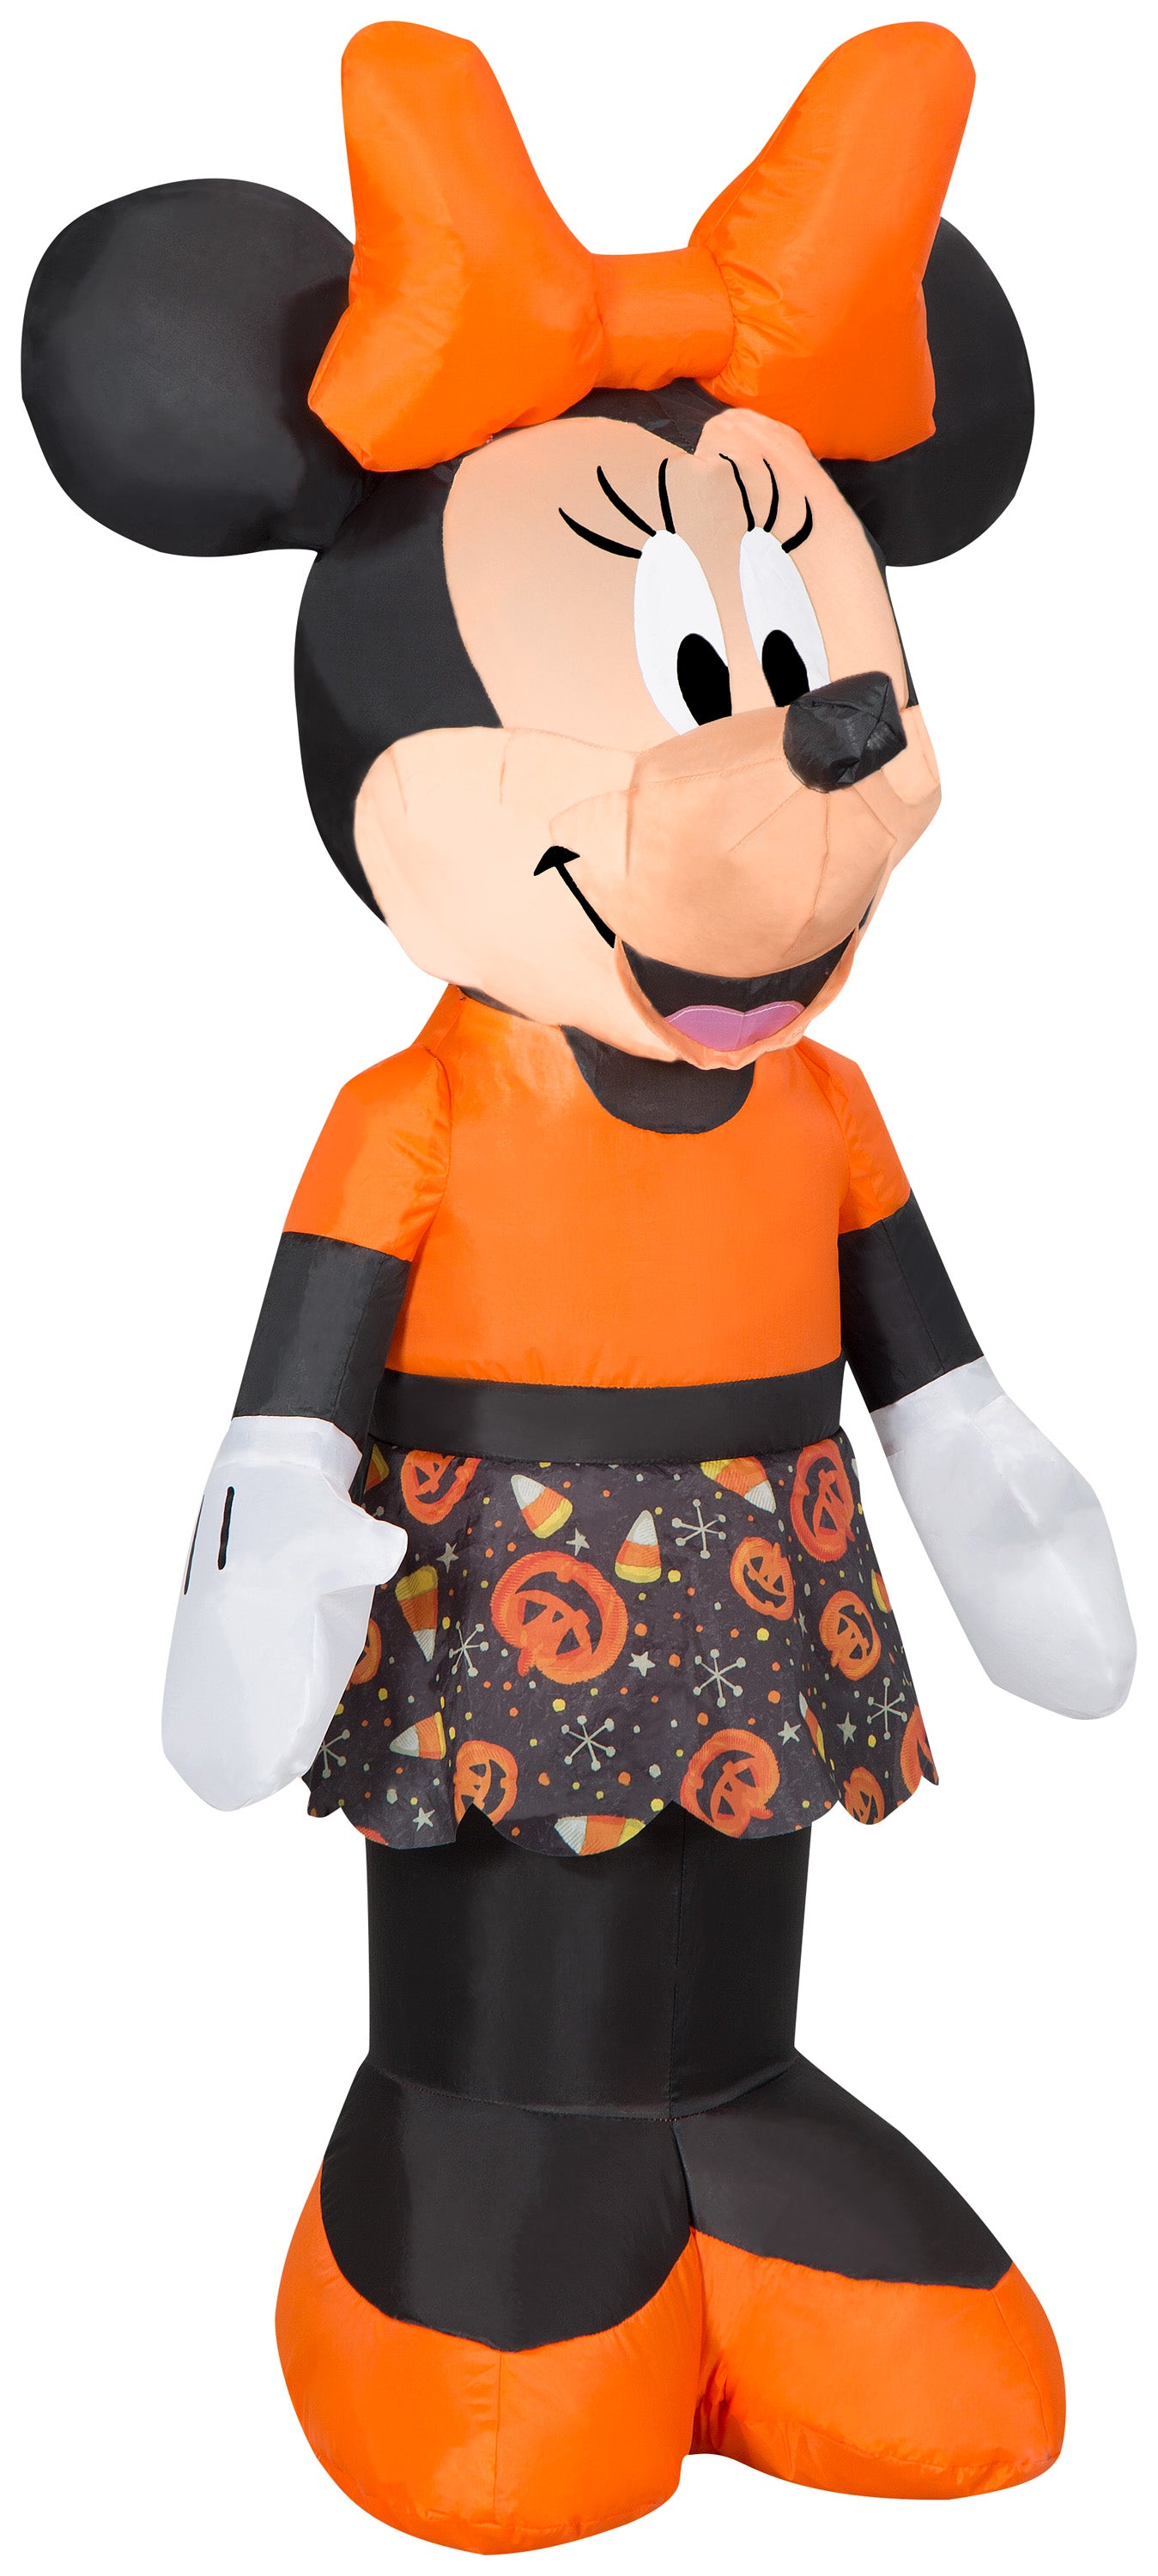 Gemmy Airblown Inflatable Minnie Mouse in Candy Skirt, 3.5 ft Tall, black